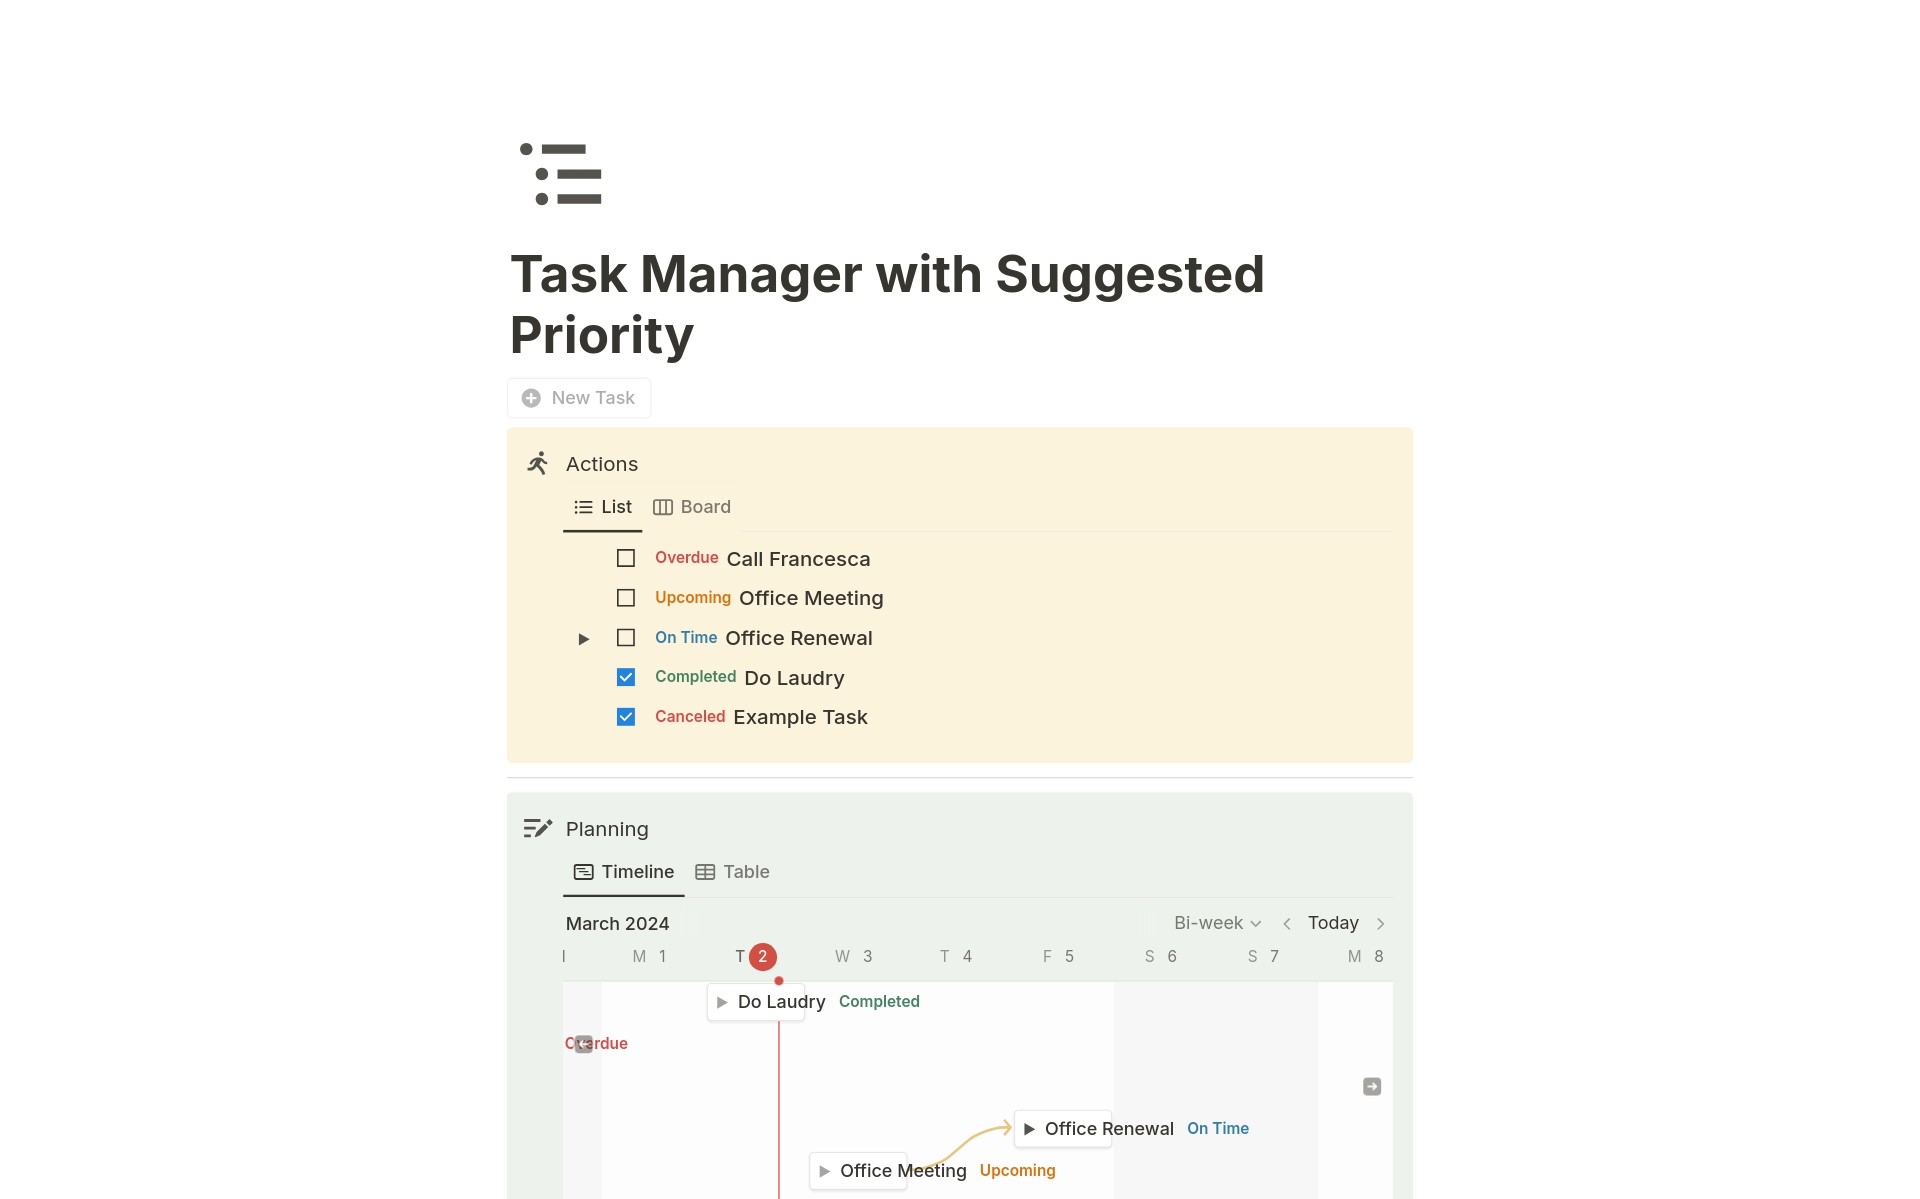 Task Manager with Suggested Priority님의 템플릿 미리보기